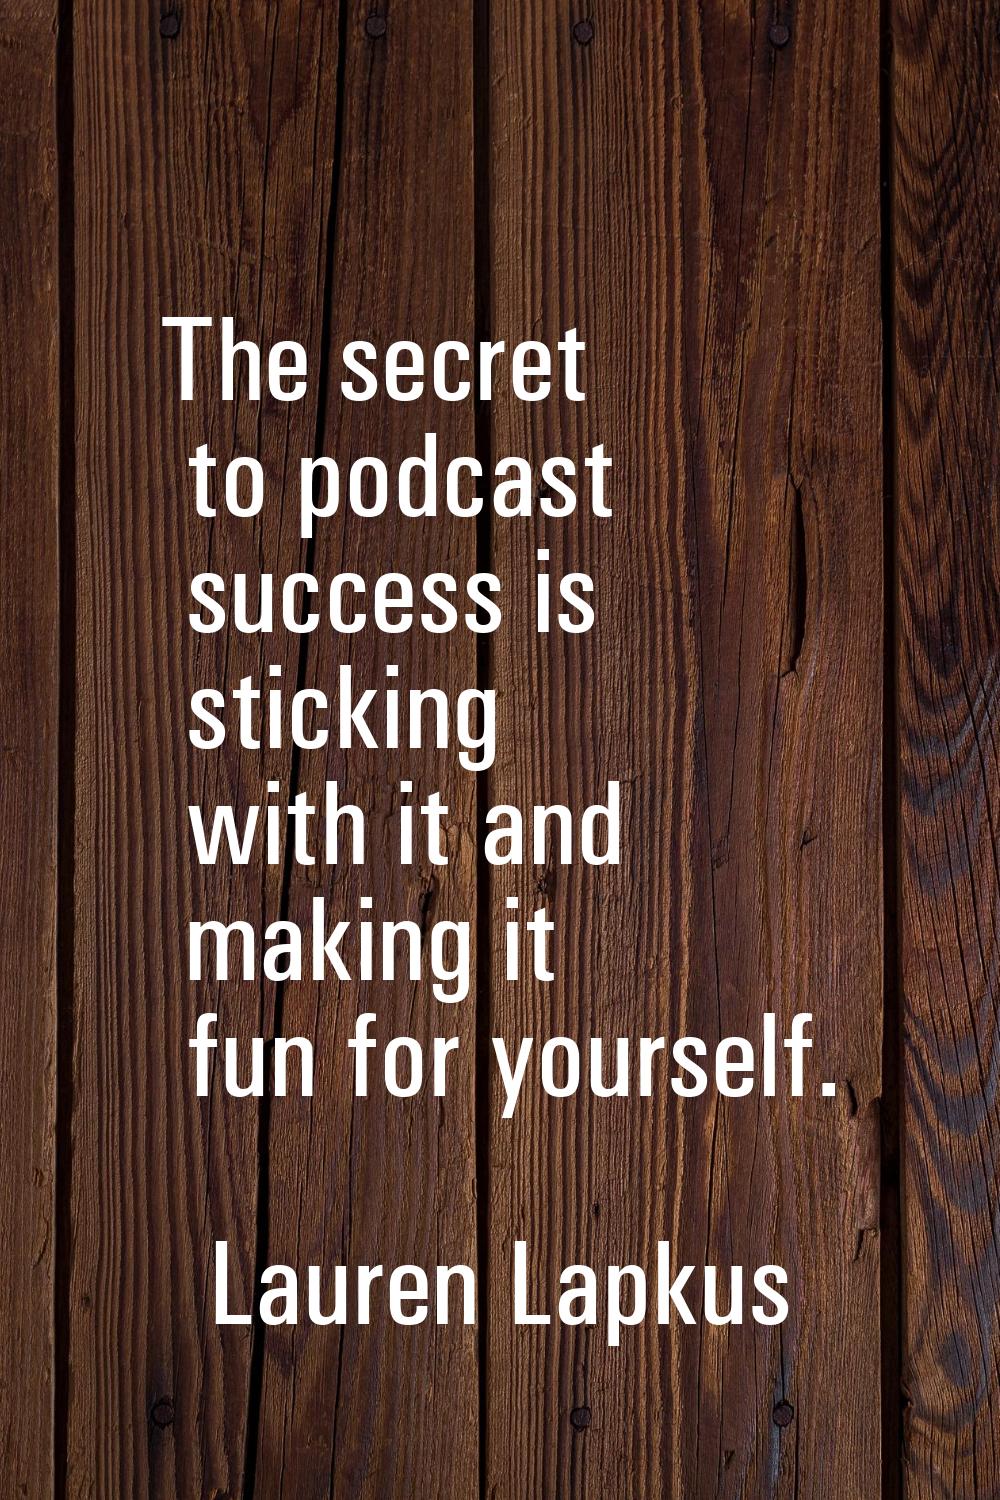 The secret to podcast success is sticking with it and making it fun for yourself.